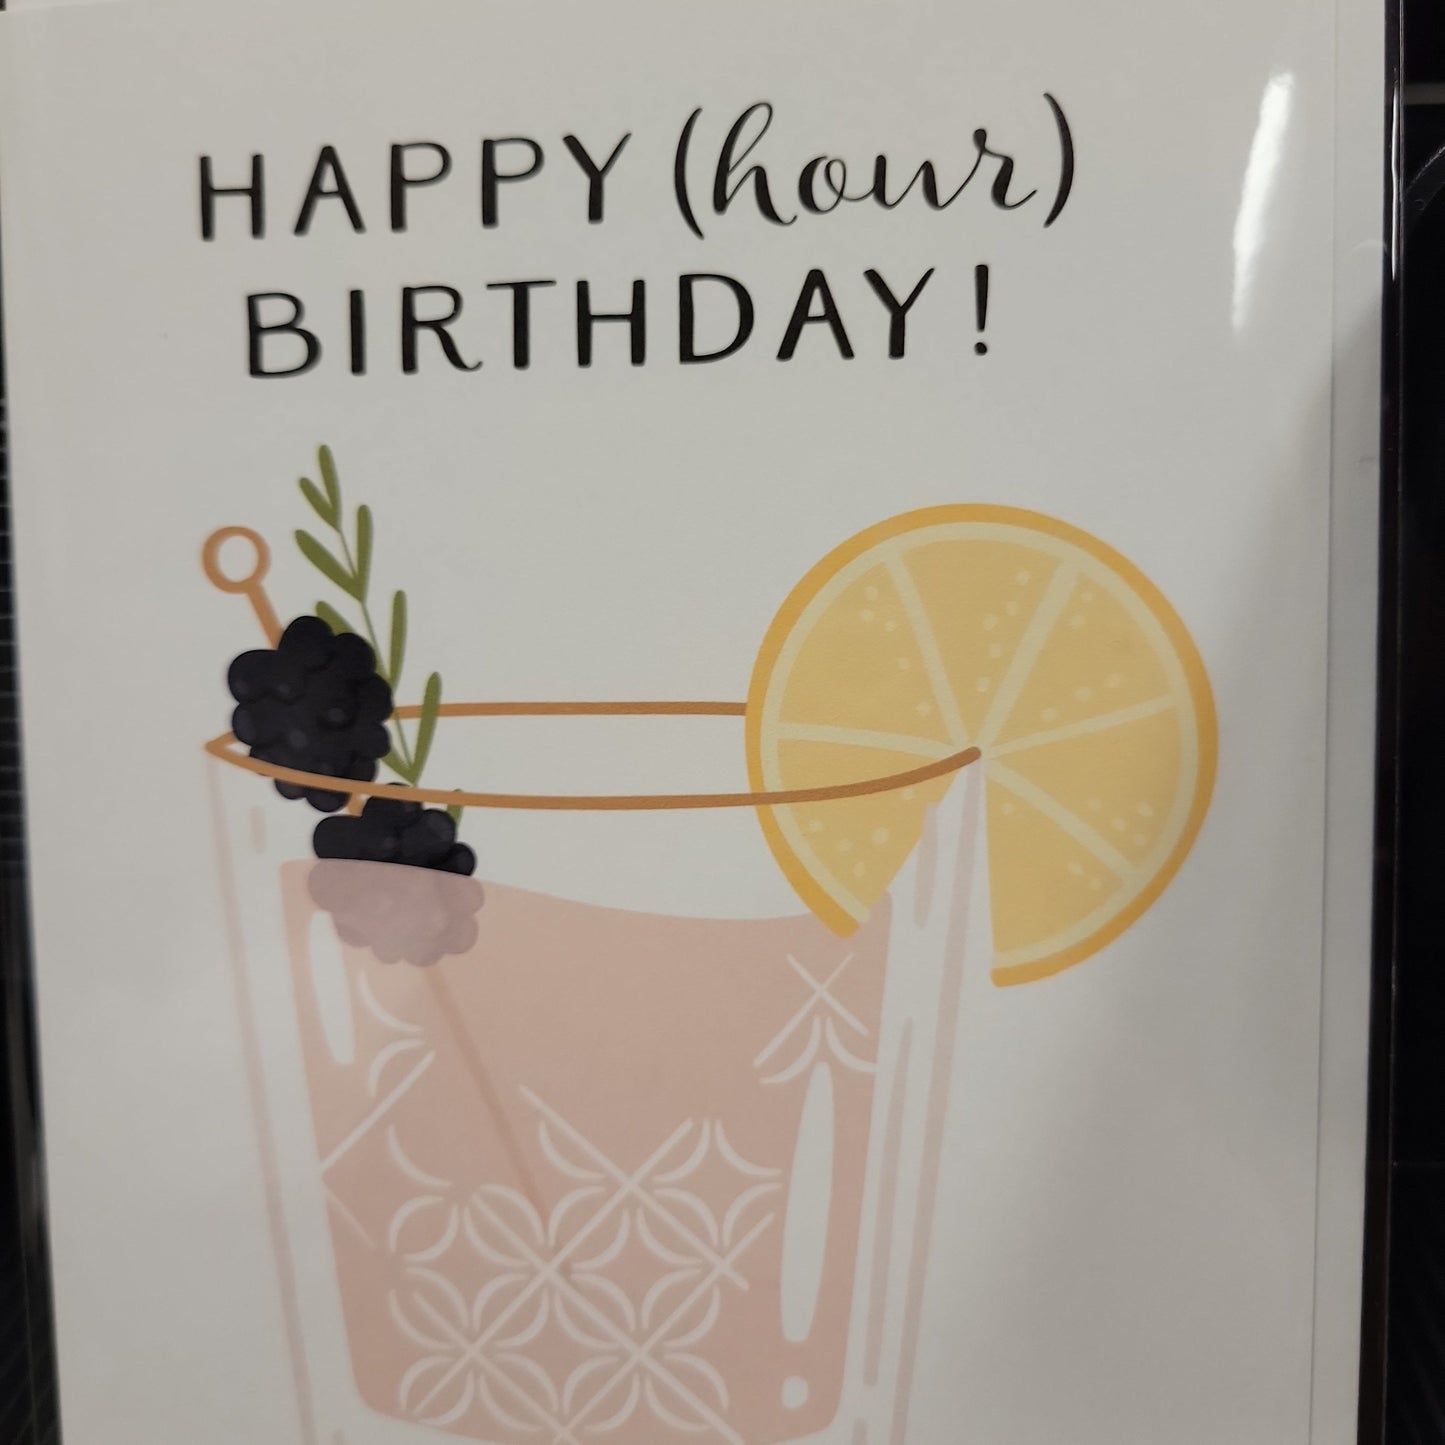 Birthday Cards-Your Private Bar